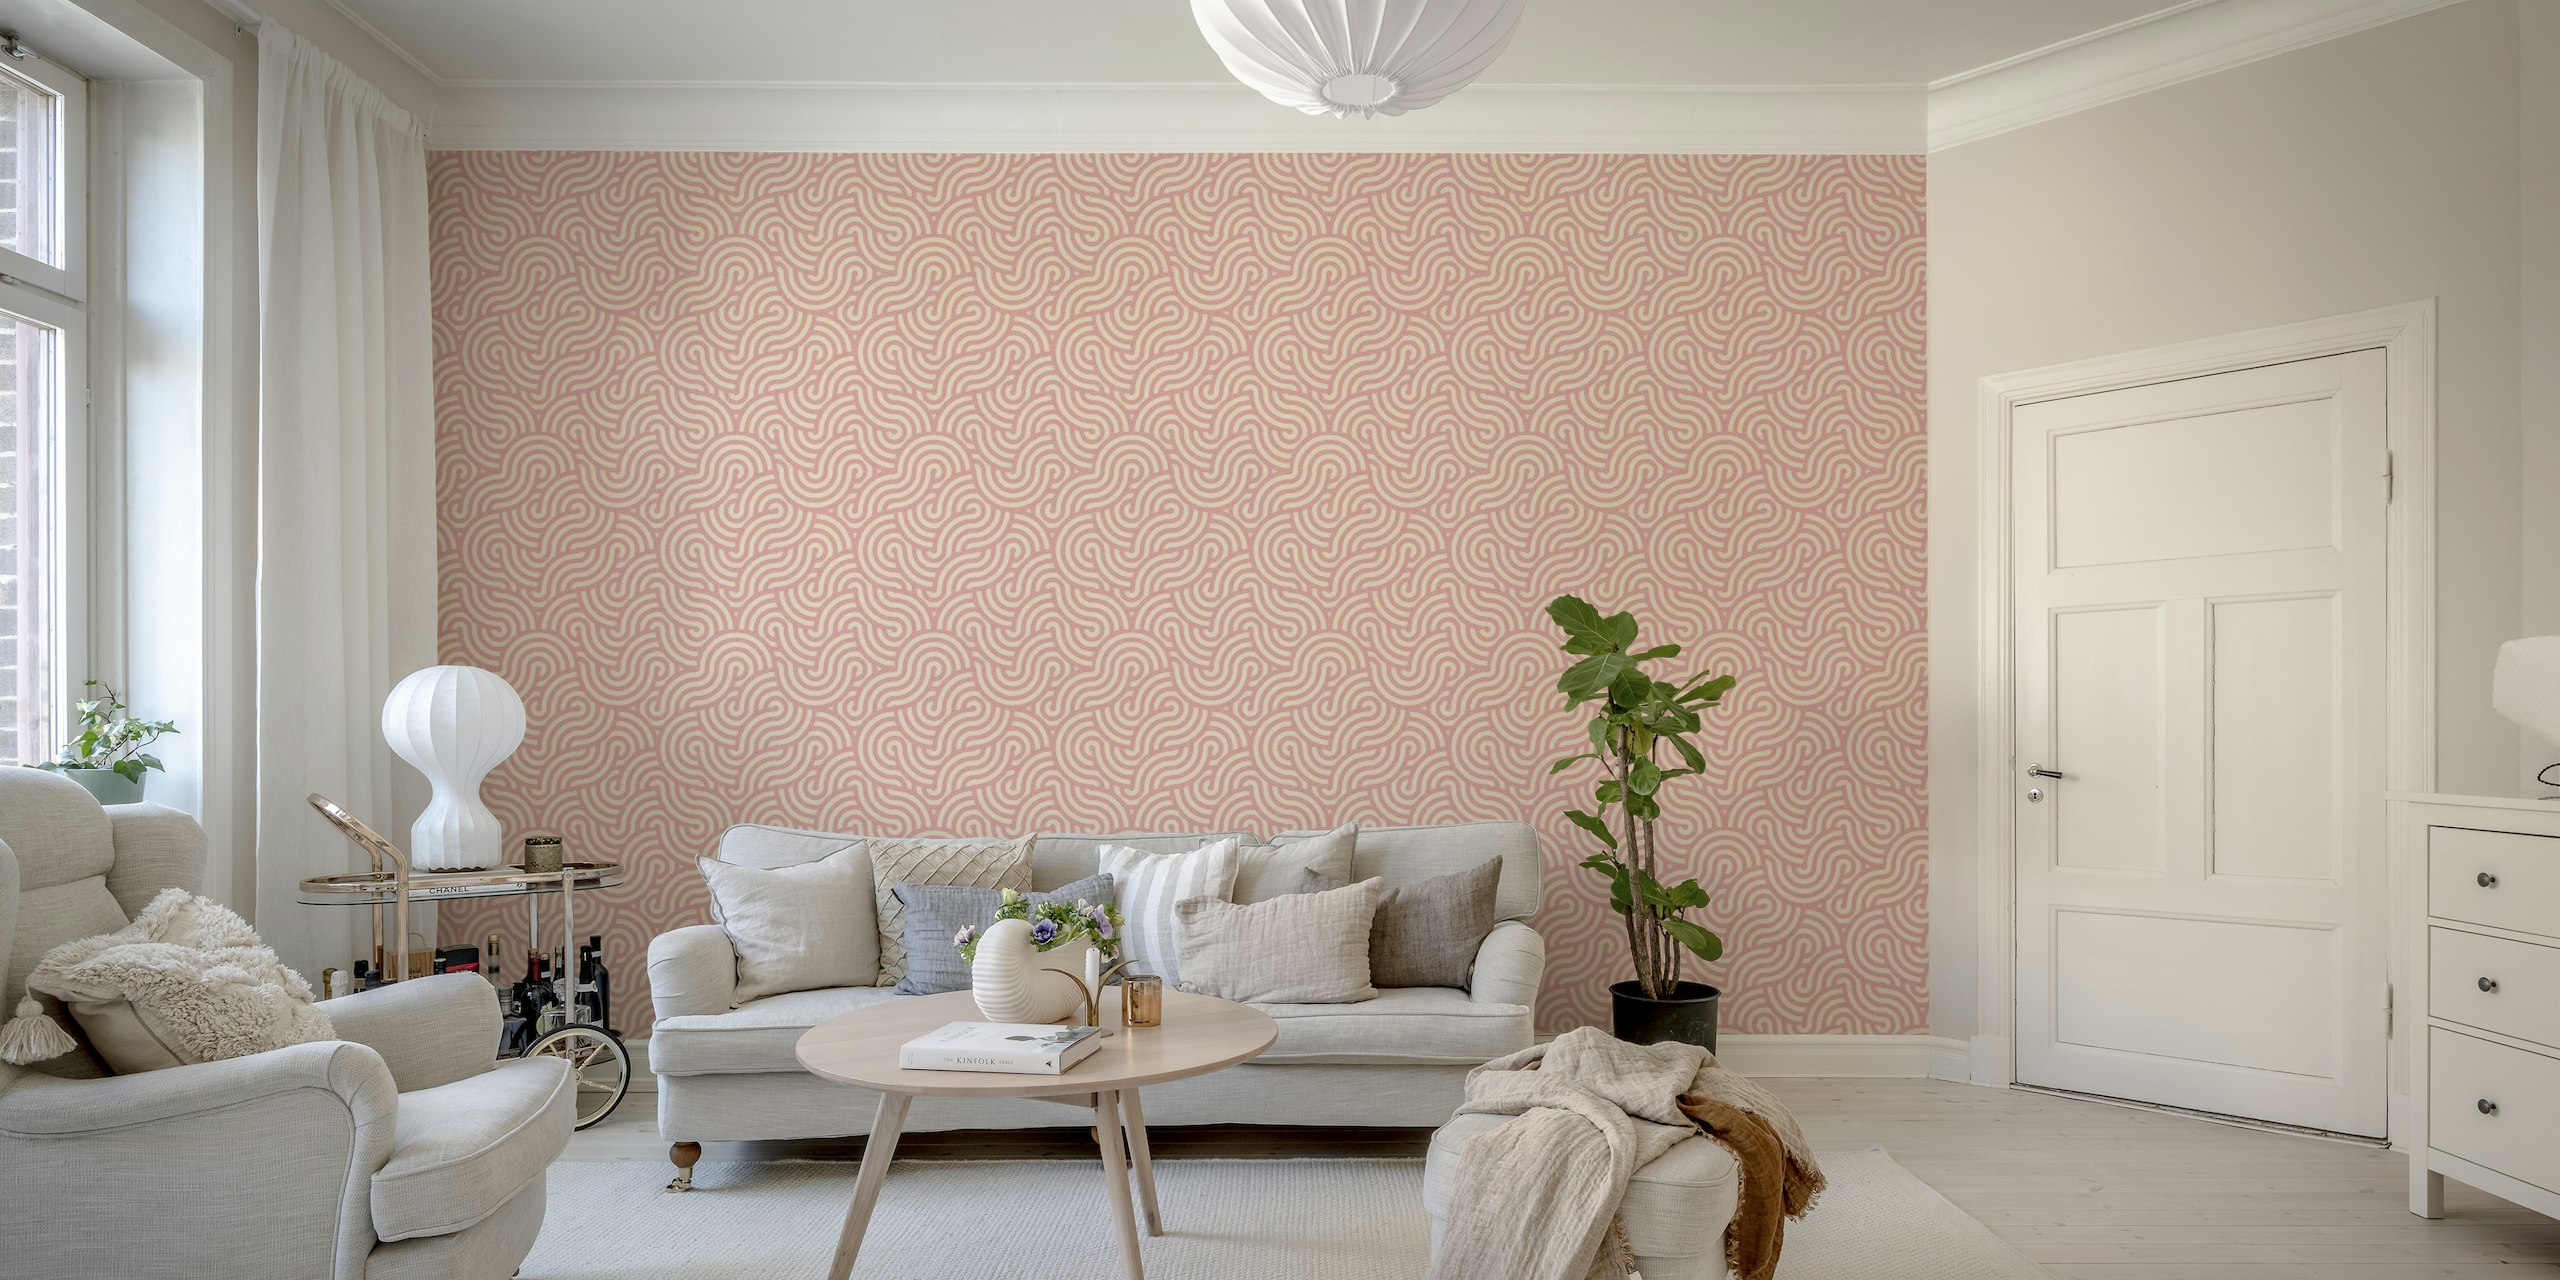 Abstract swirl pattern in bubblegum pink and almond on a wall mural